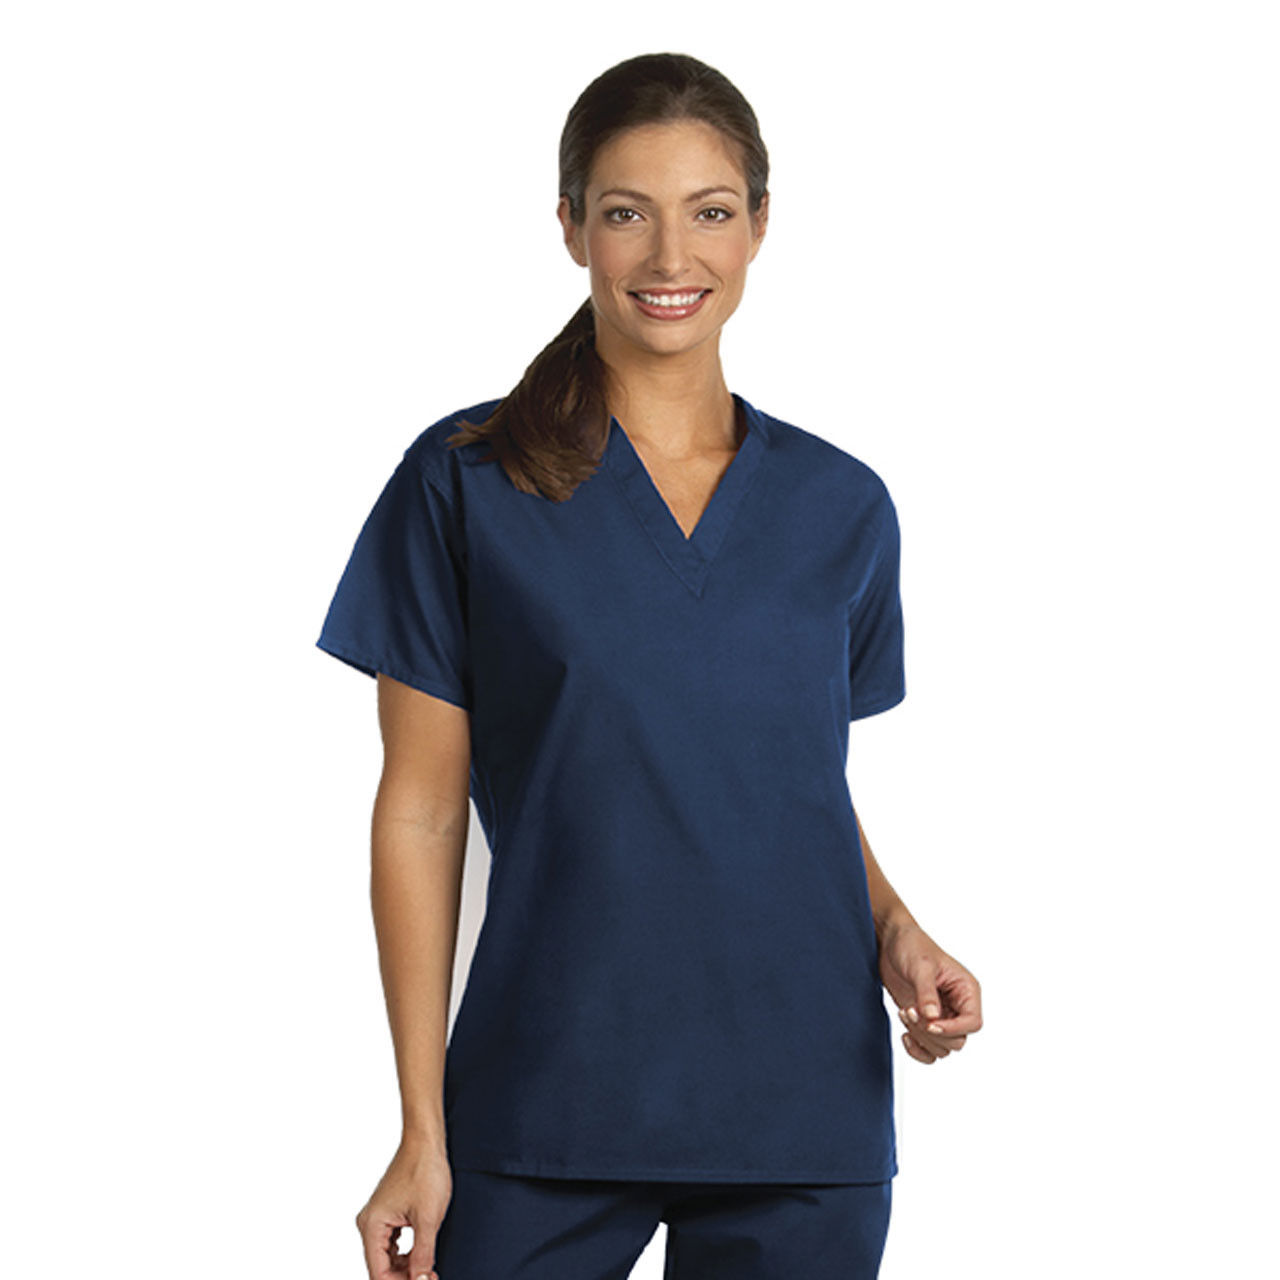 Do the blue nurse scrubs have any pockets, specifically the navy reversible v-neck ones?